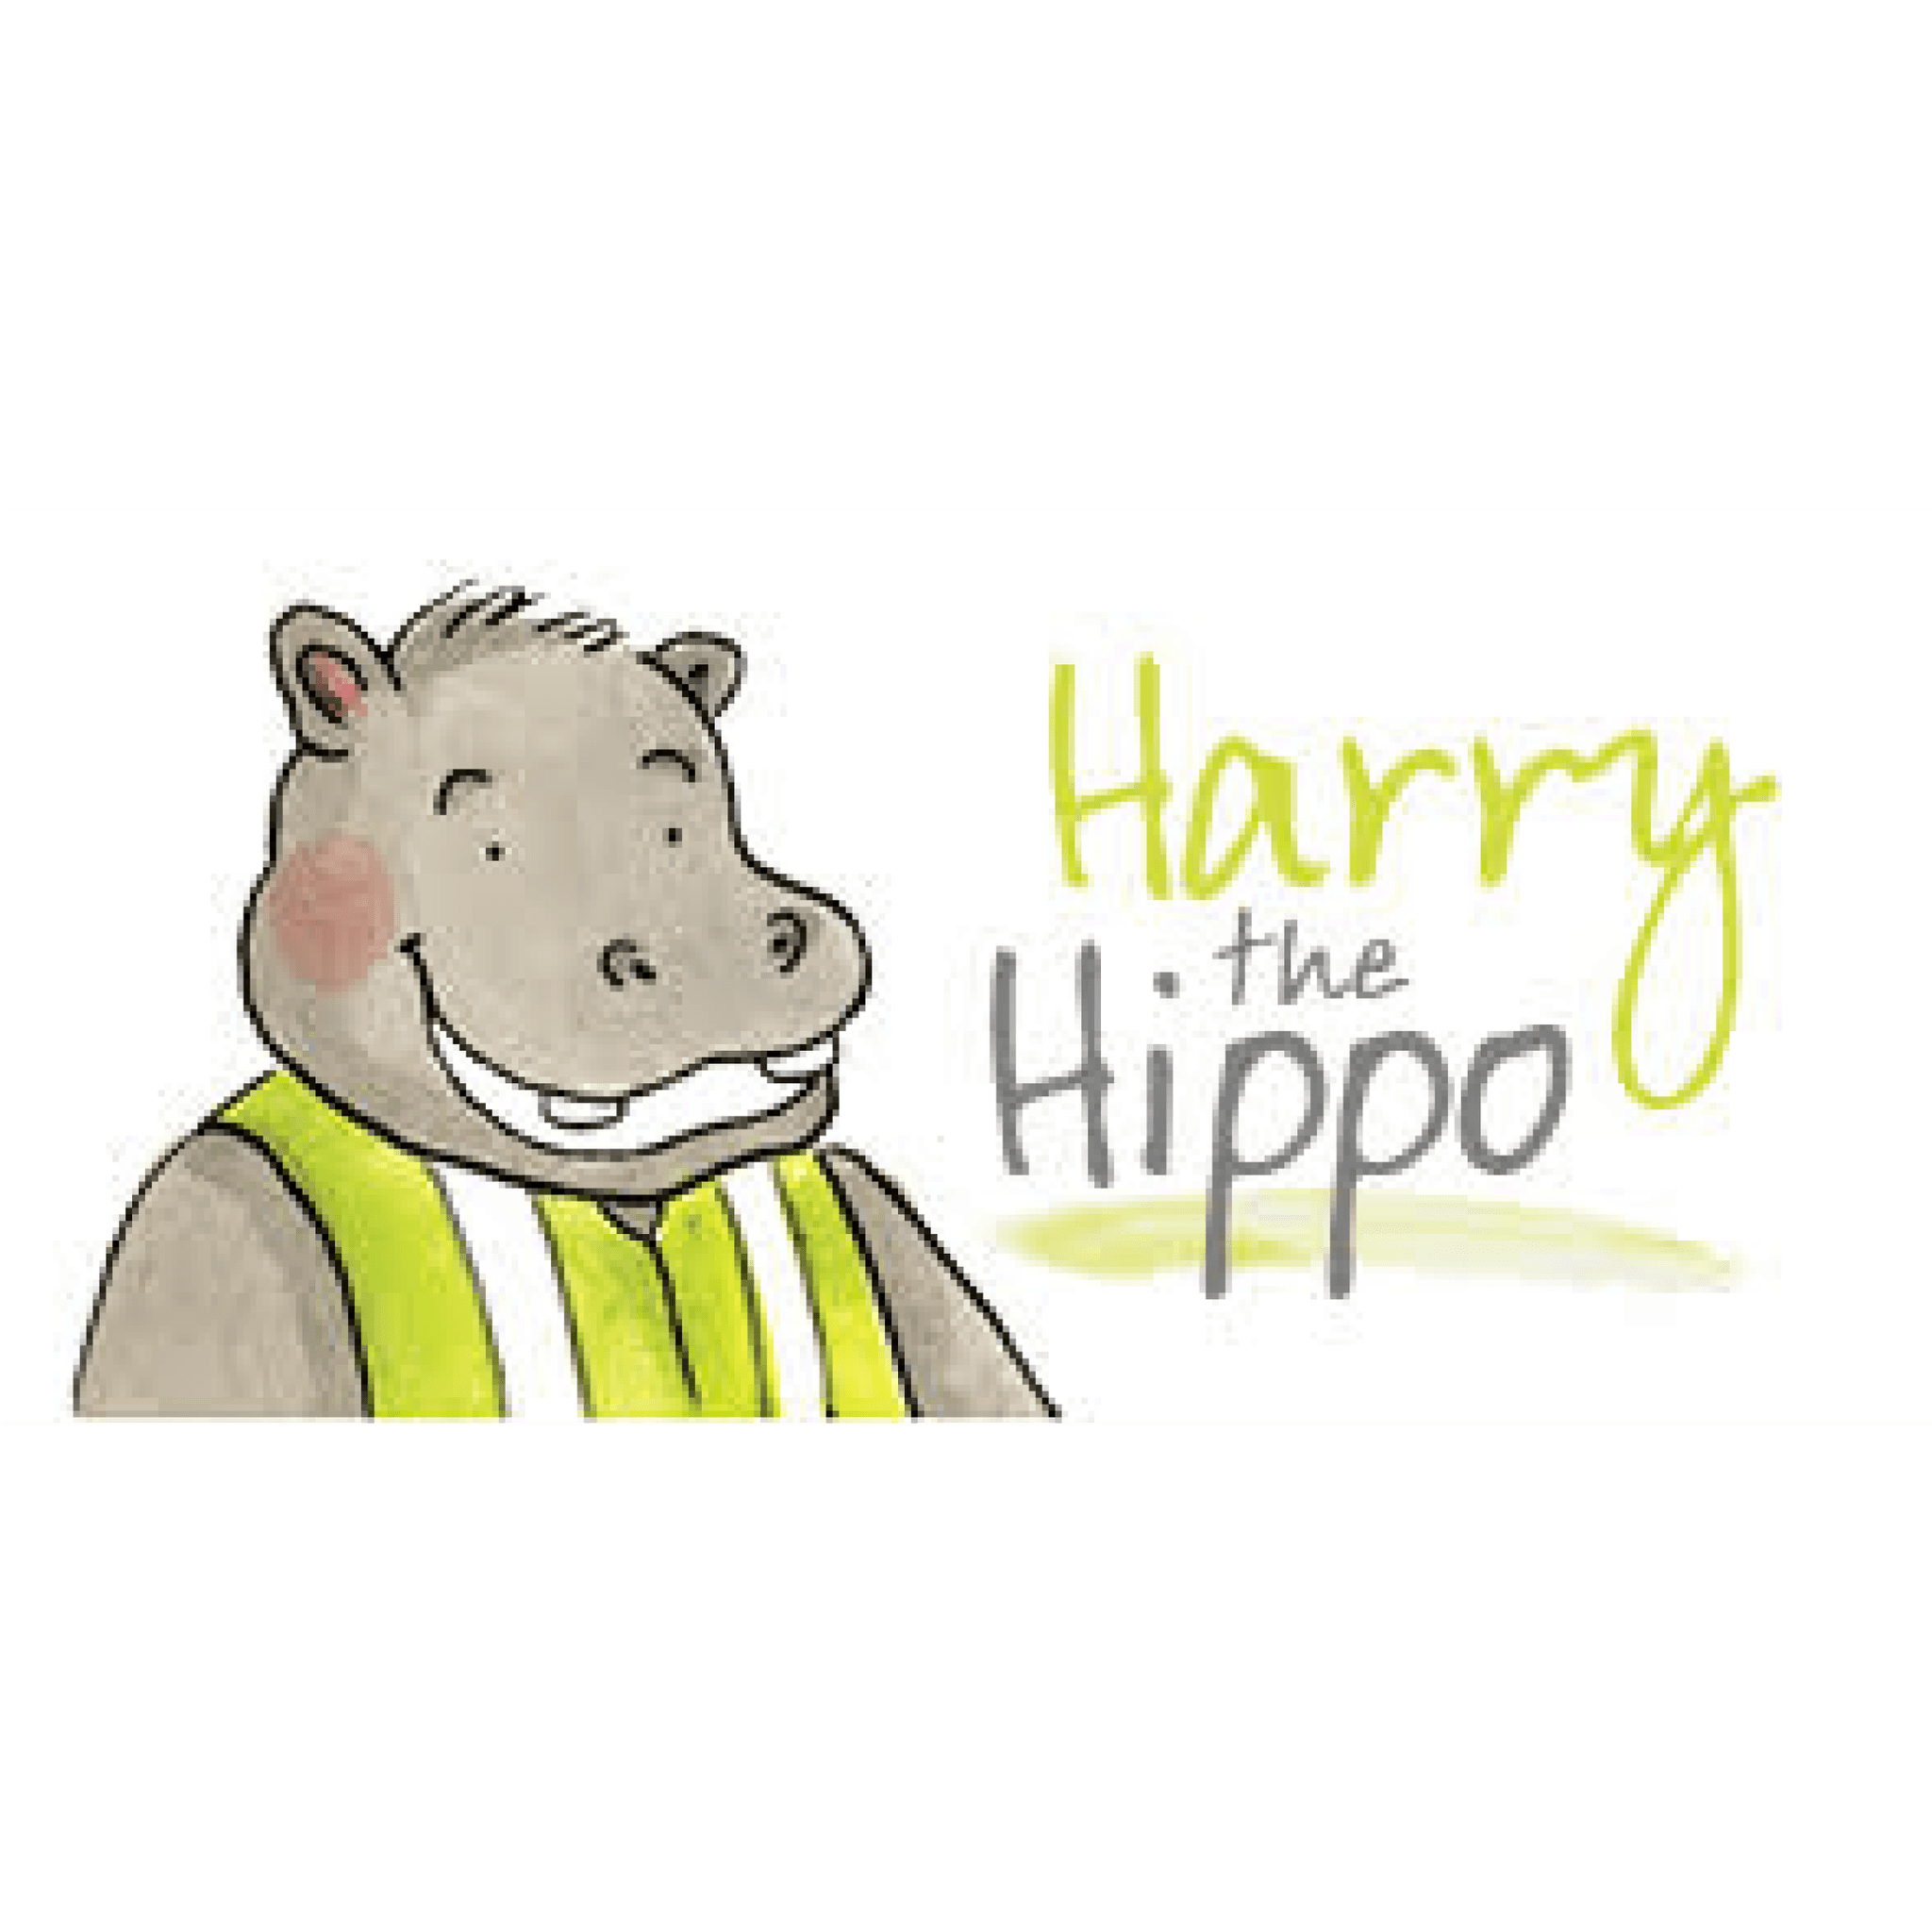 HarryTheHippos About